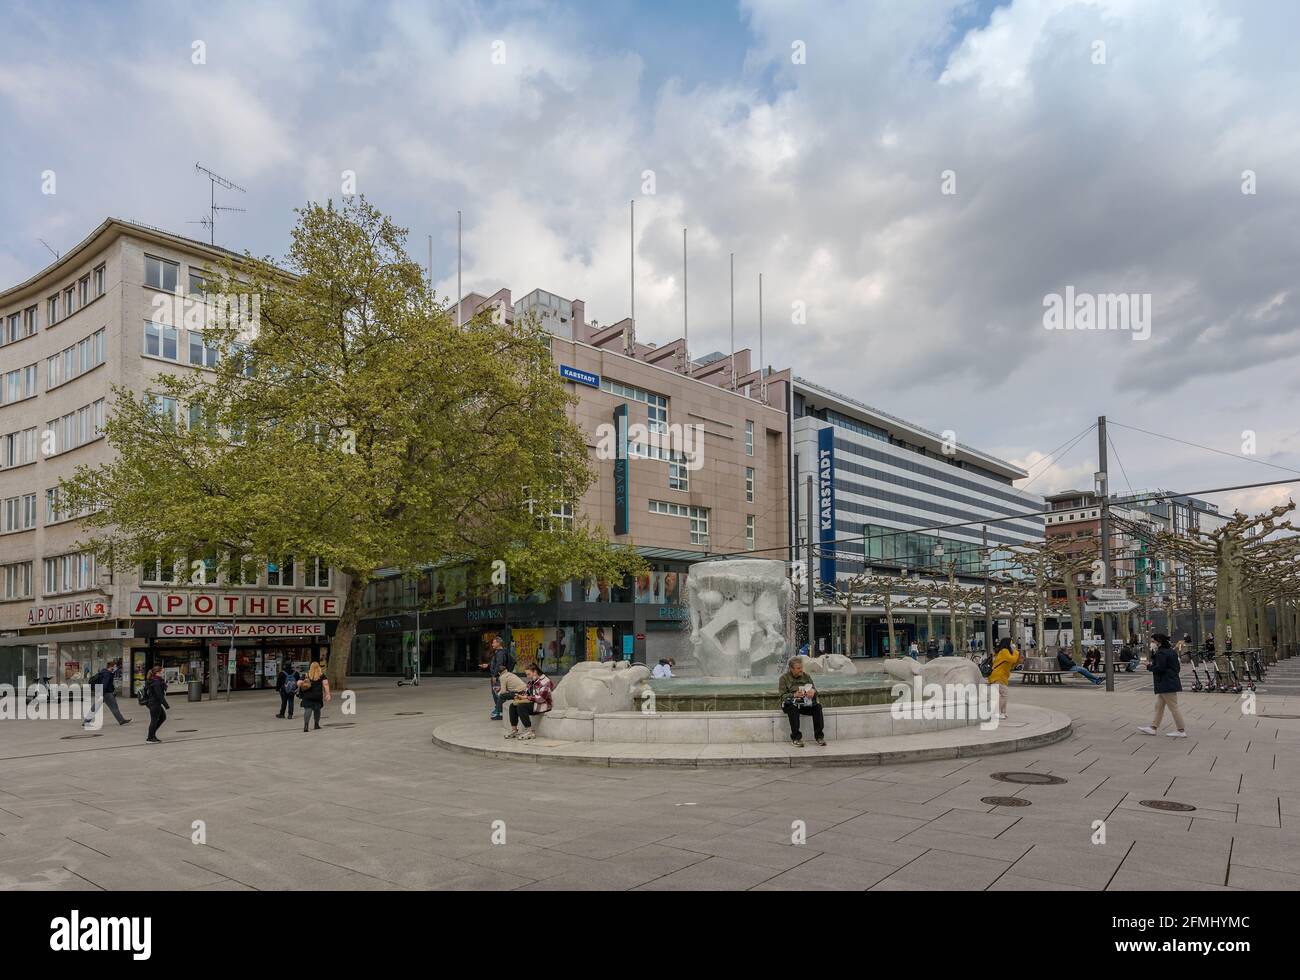 The Brockhaus fountain in the shopping street Zeil, Frankfurt am Main, Germany Stock Photo